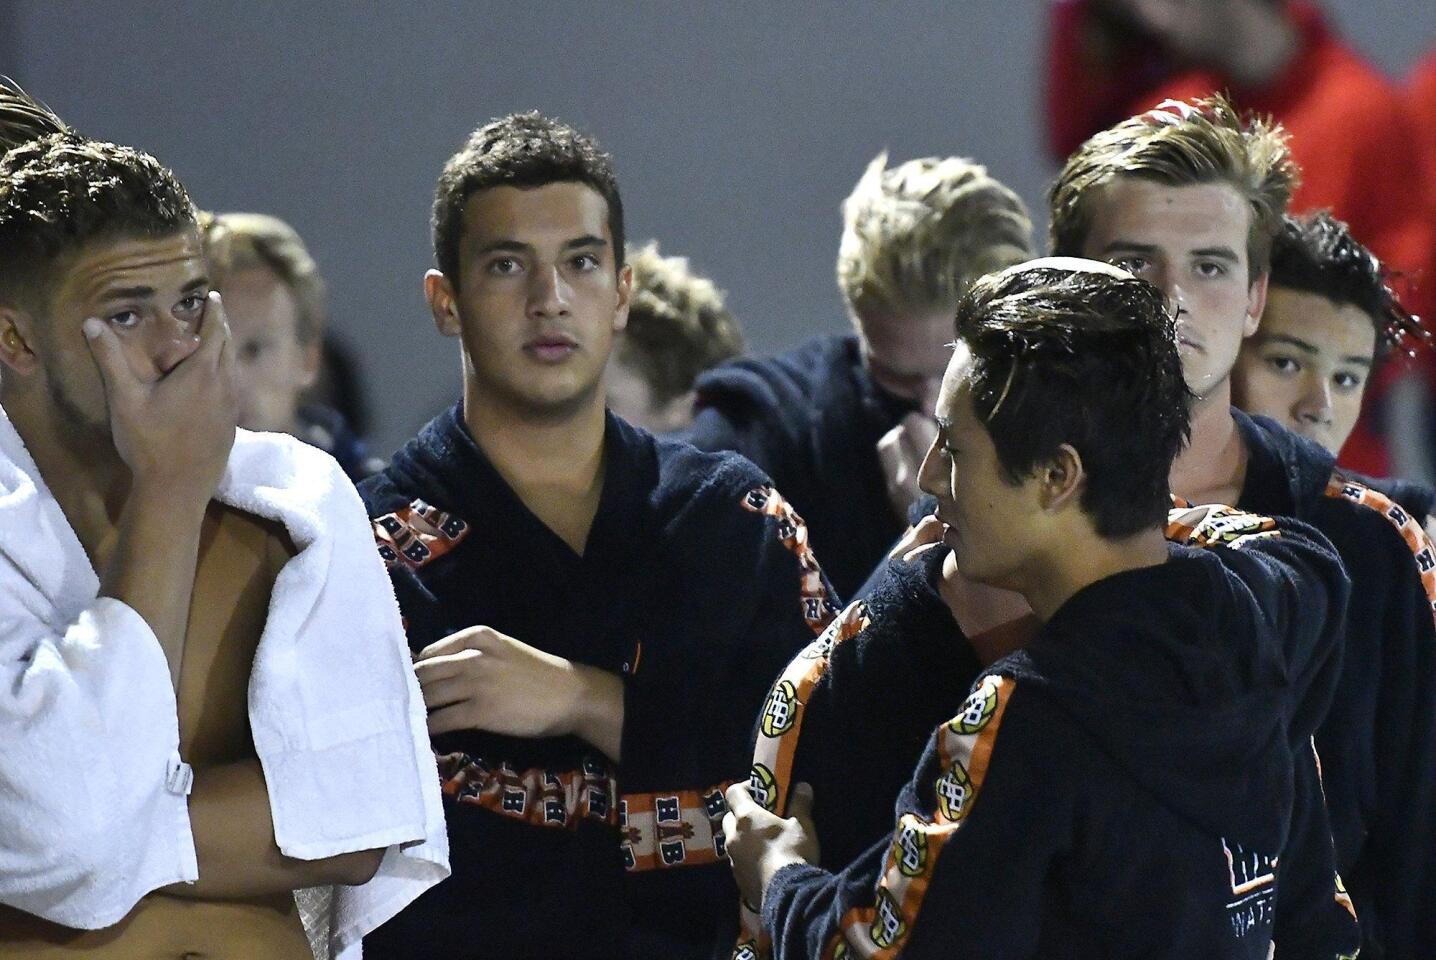 Huntington Beach High boys’ water polo players show their frustration after losing to Orange Lutheran 7-9 in the CIF Southern Section Division 1 championship game at Woollett Aquatics Center in Irvine on Saturday.